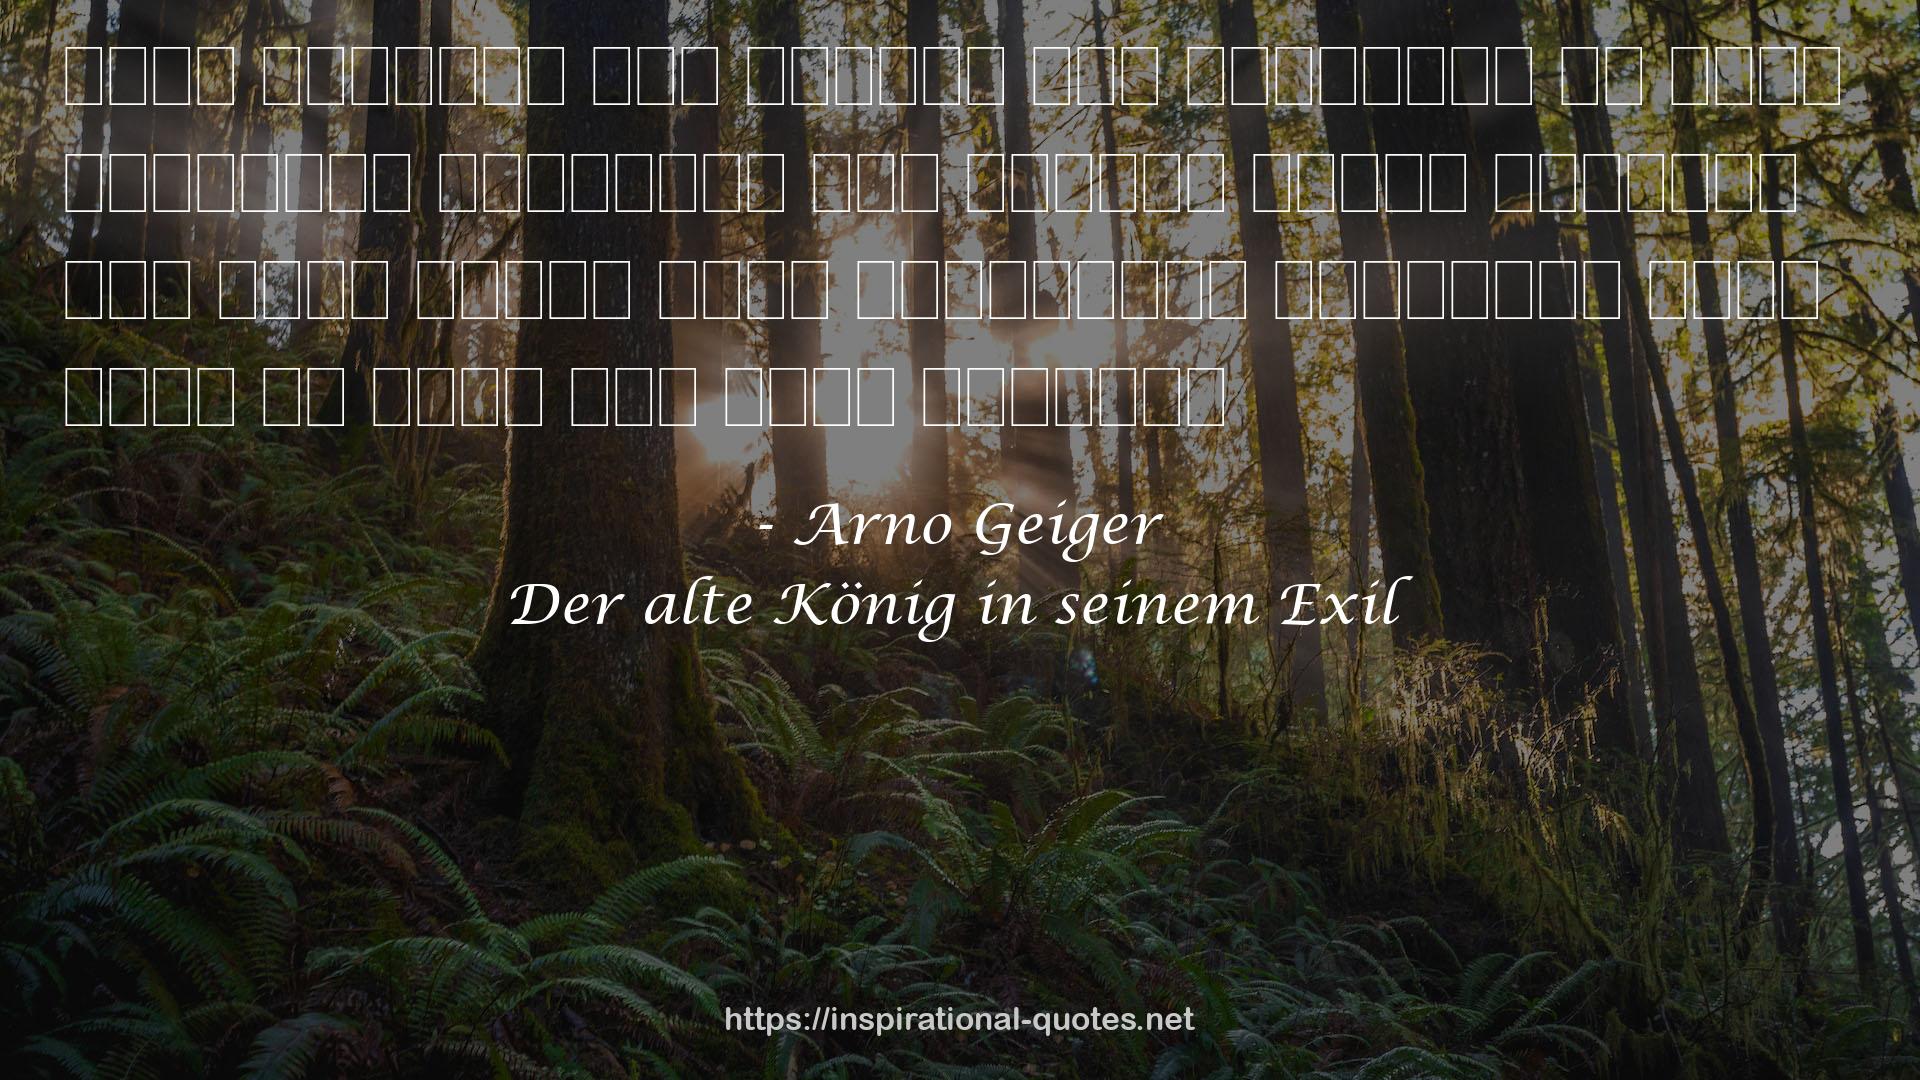 Arno Geiger QUOTES